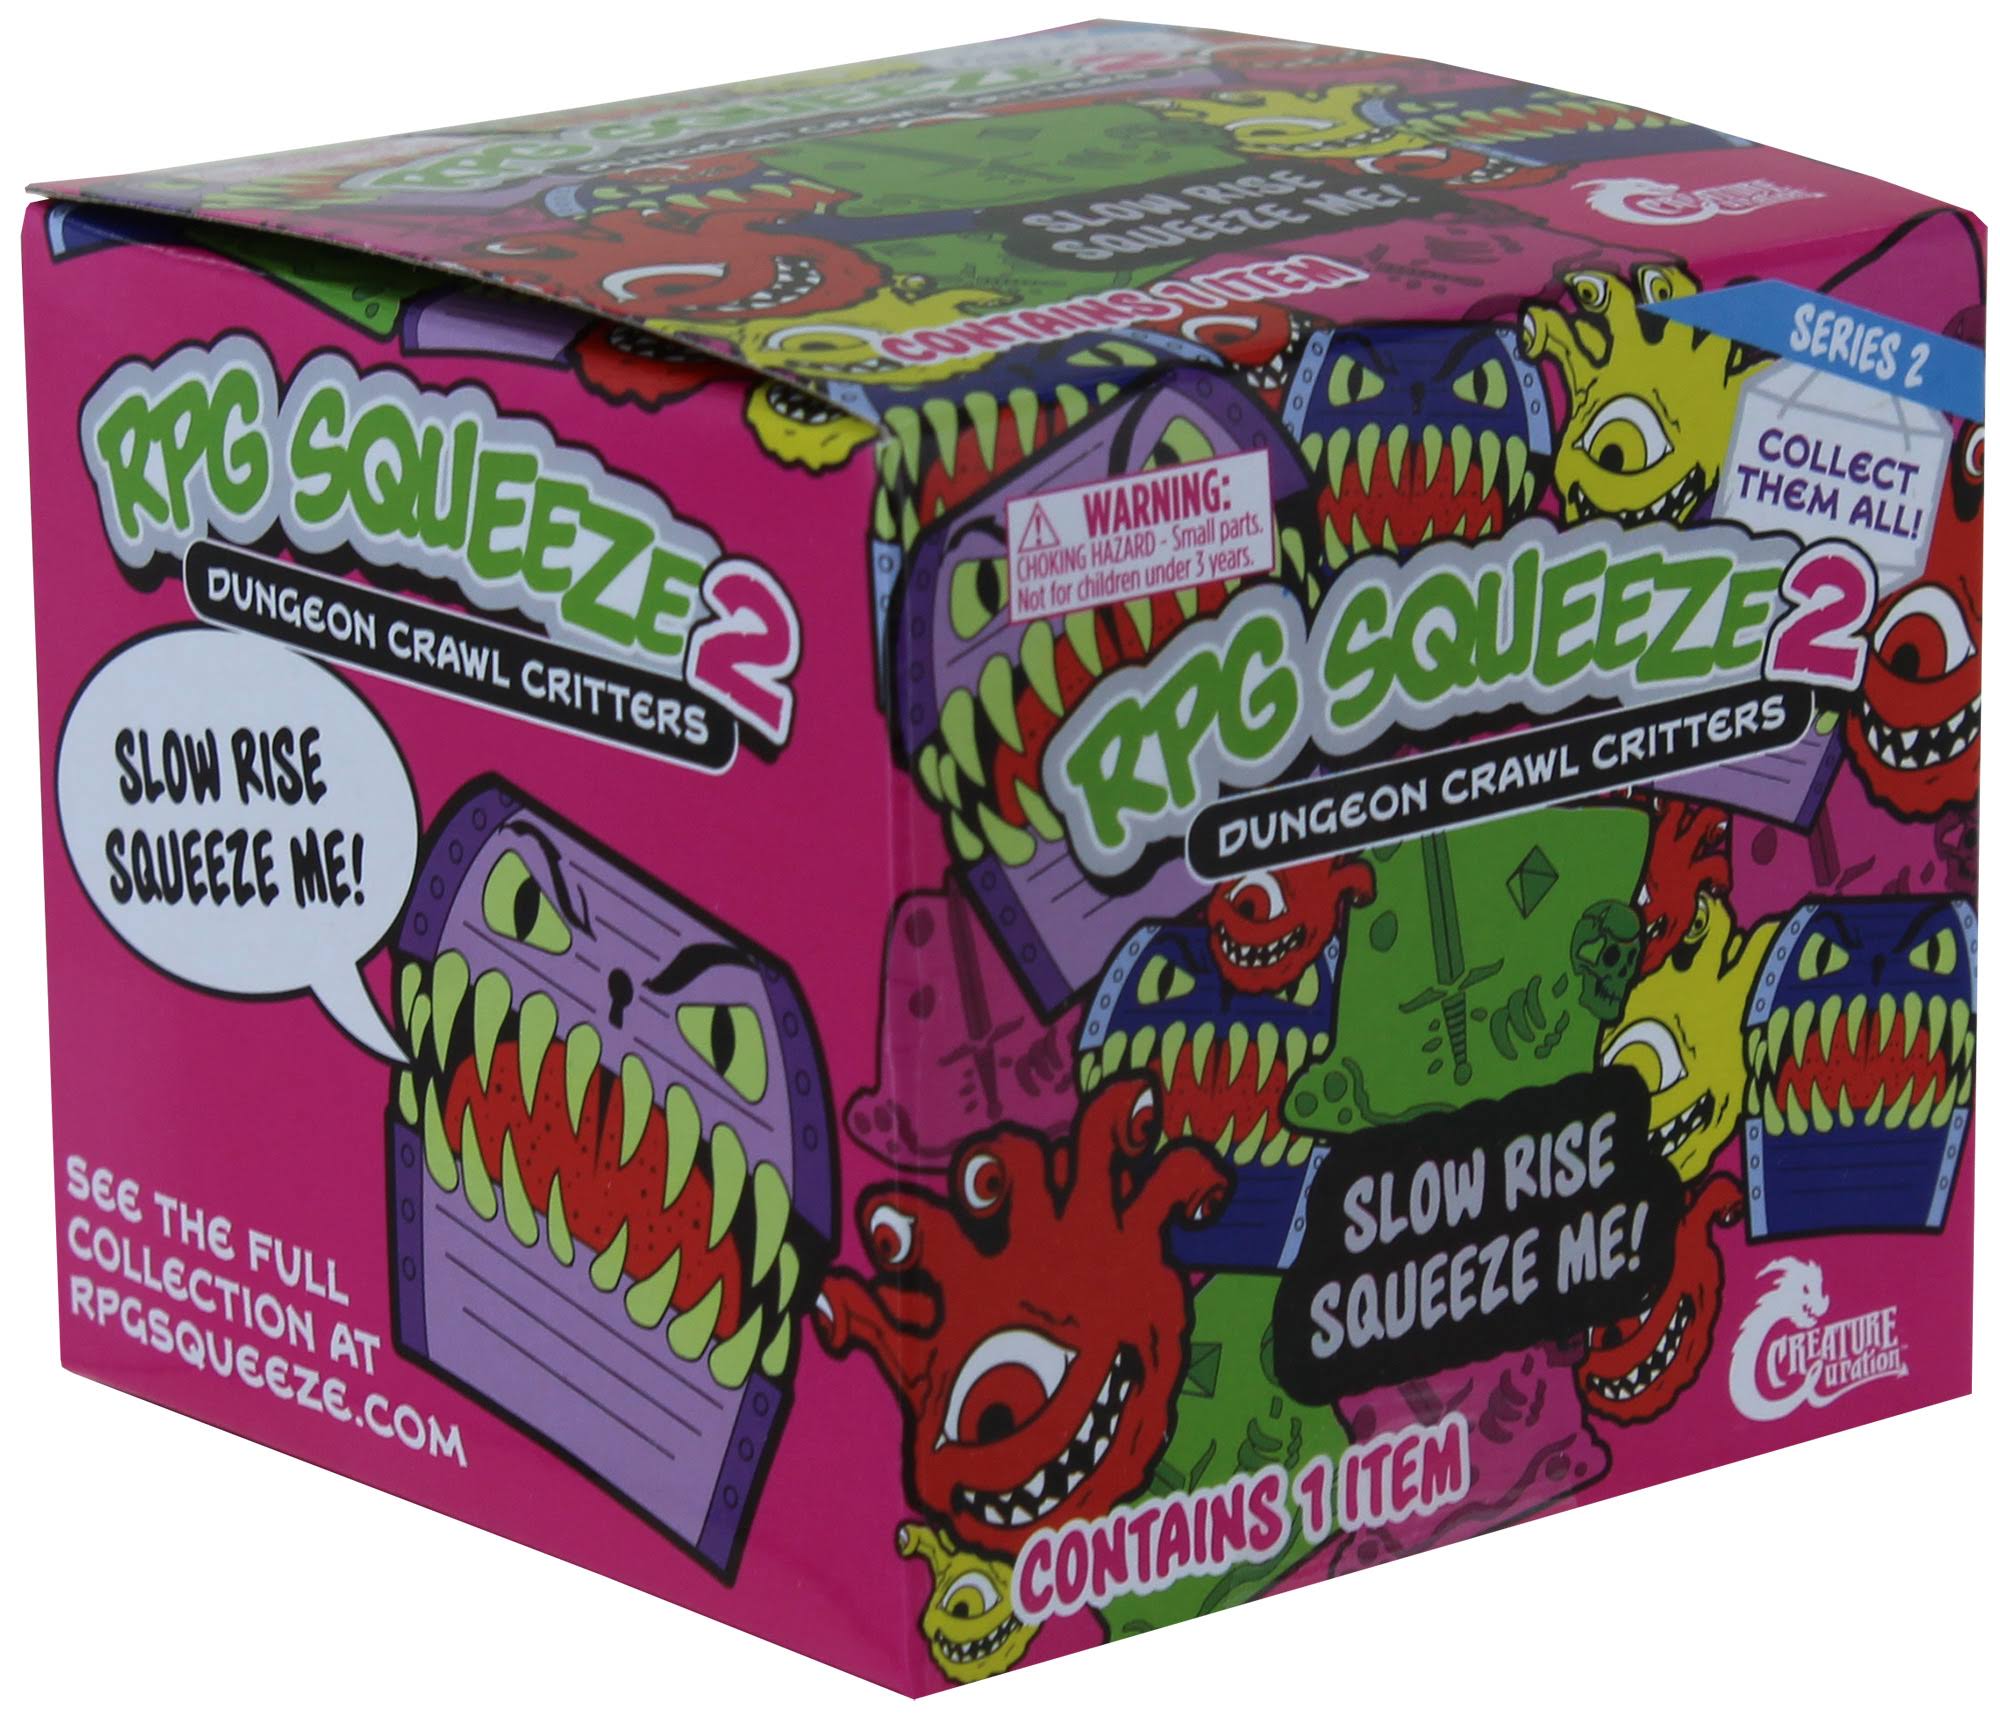 RPG Squeeze - Series 2 - Dungeon Crawl Critters Mystery Squeeze Toy